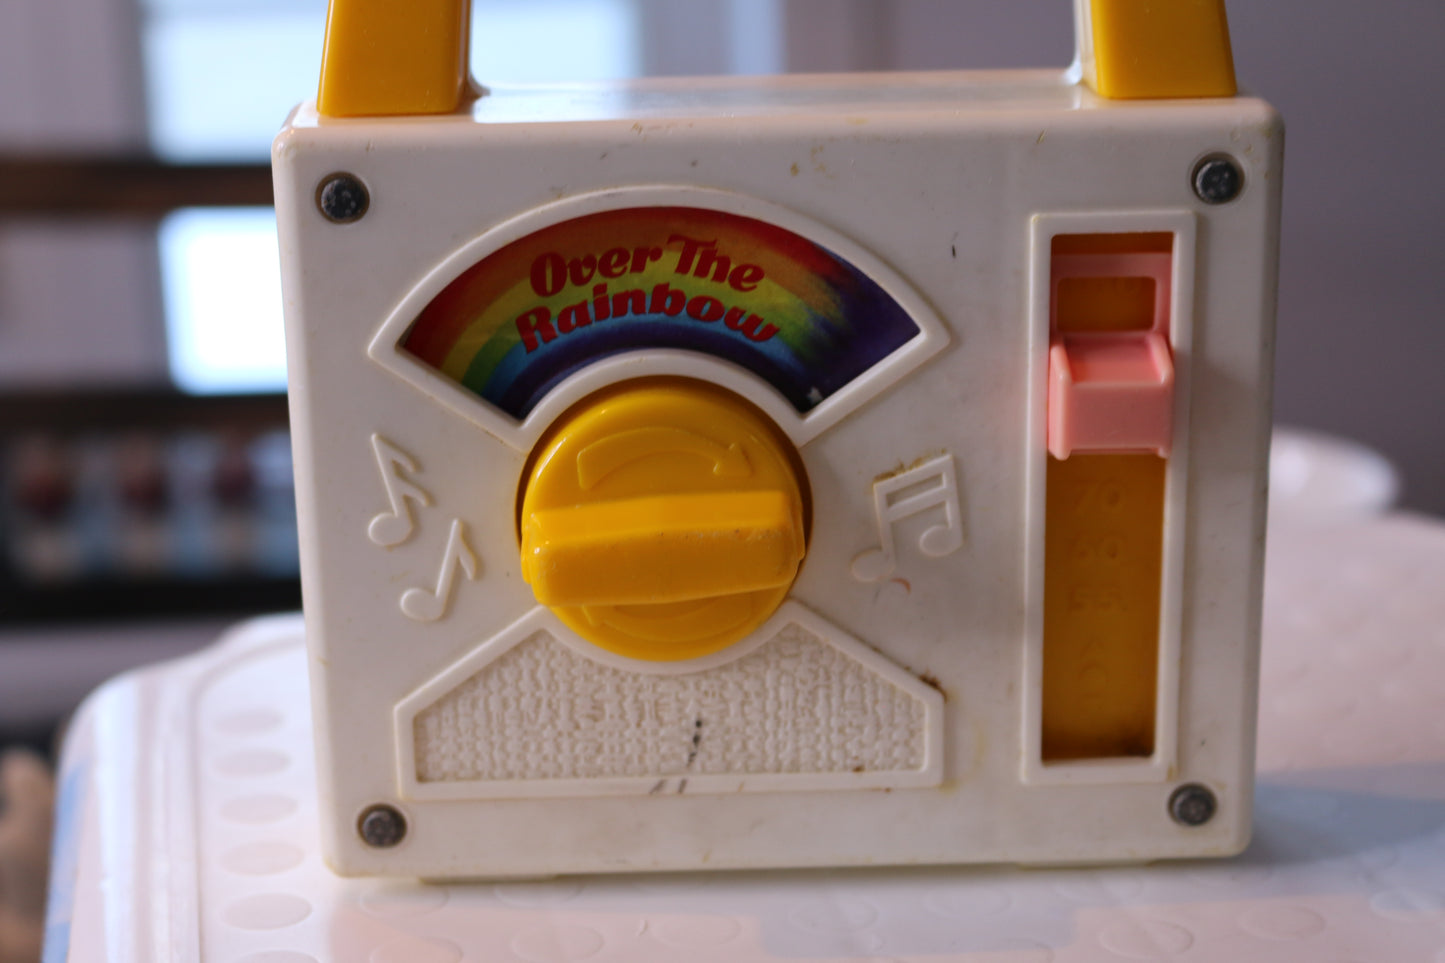 Fisher-Price Over The Rainbow Radio. Tested/Works